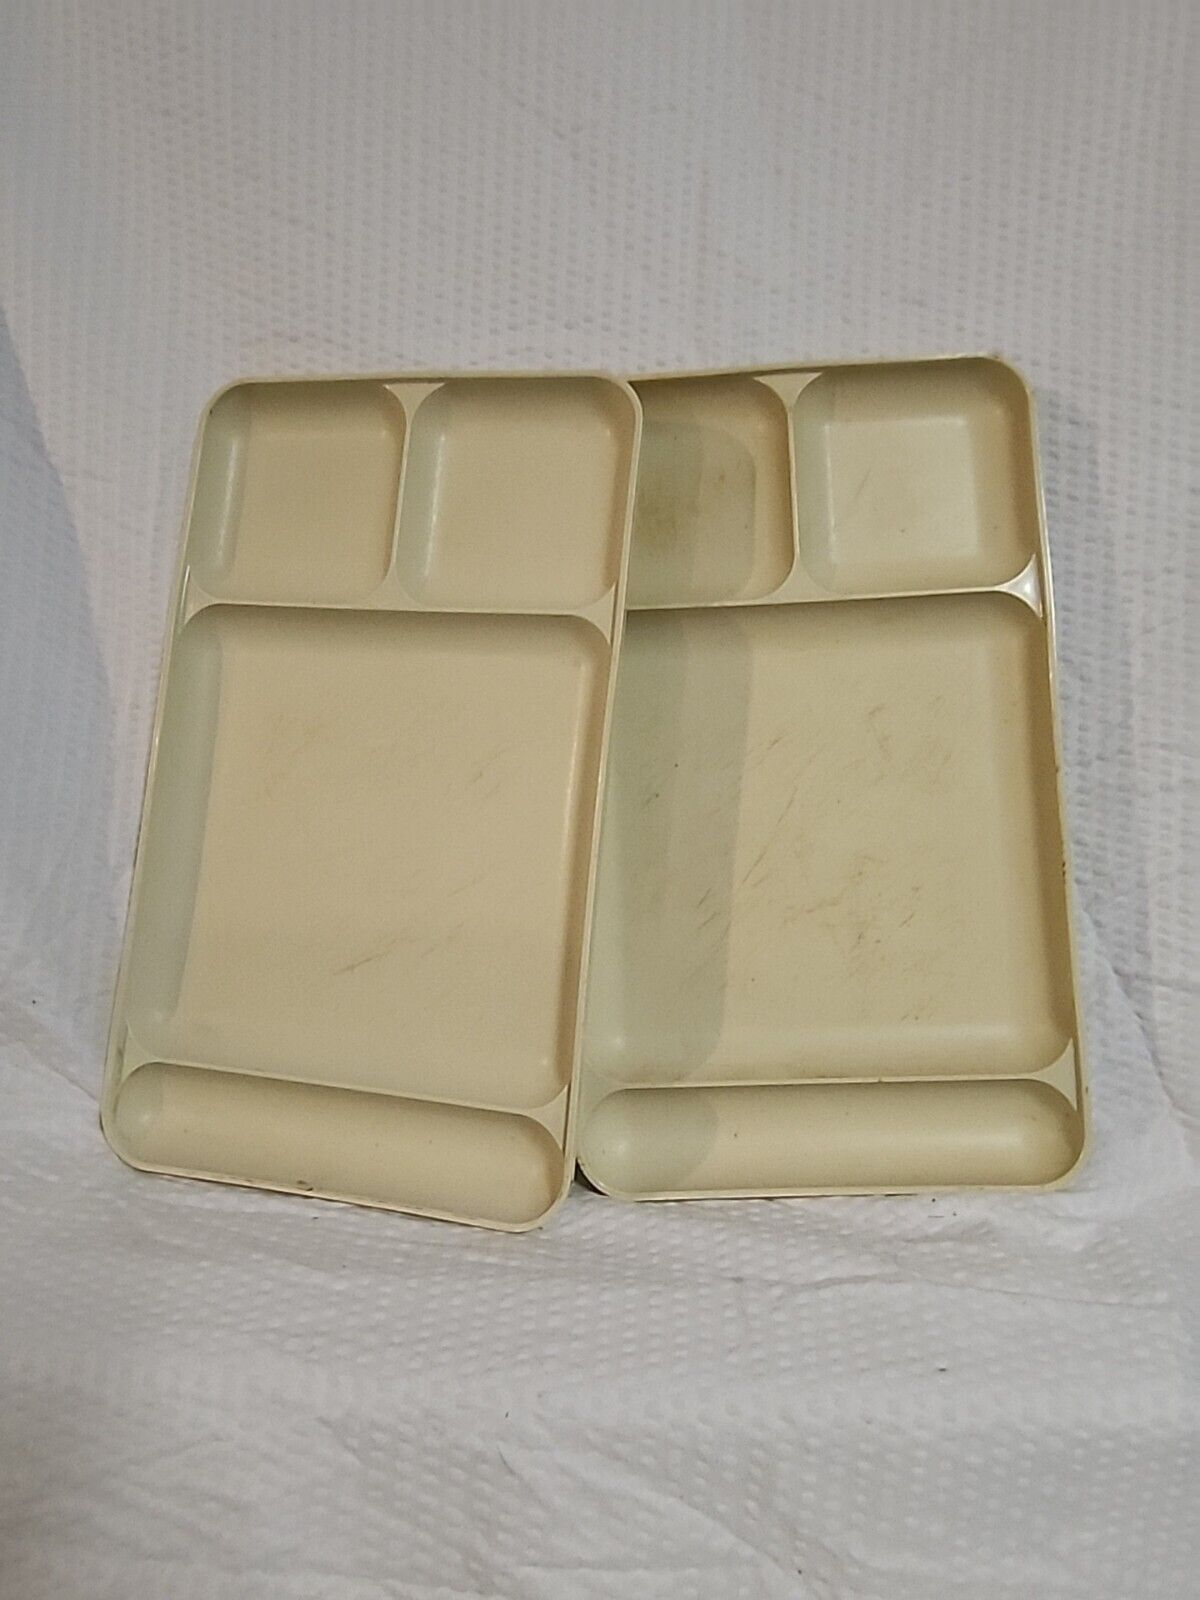 Vintage Tupperware divided plates, off white picnic trays set of 2